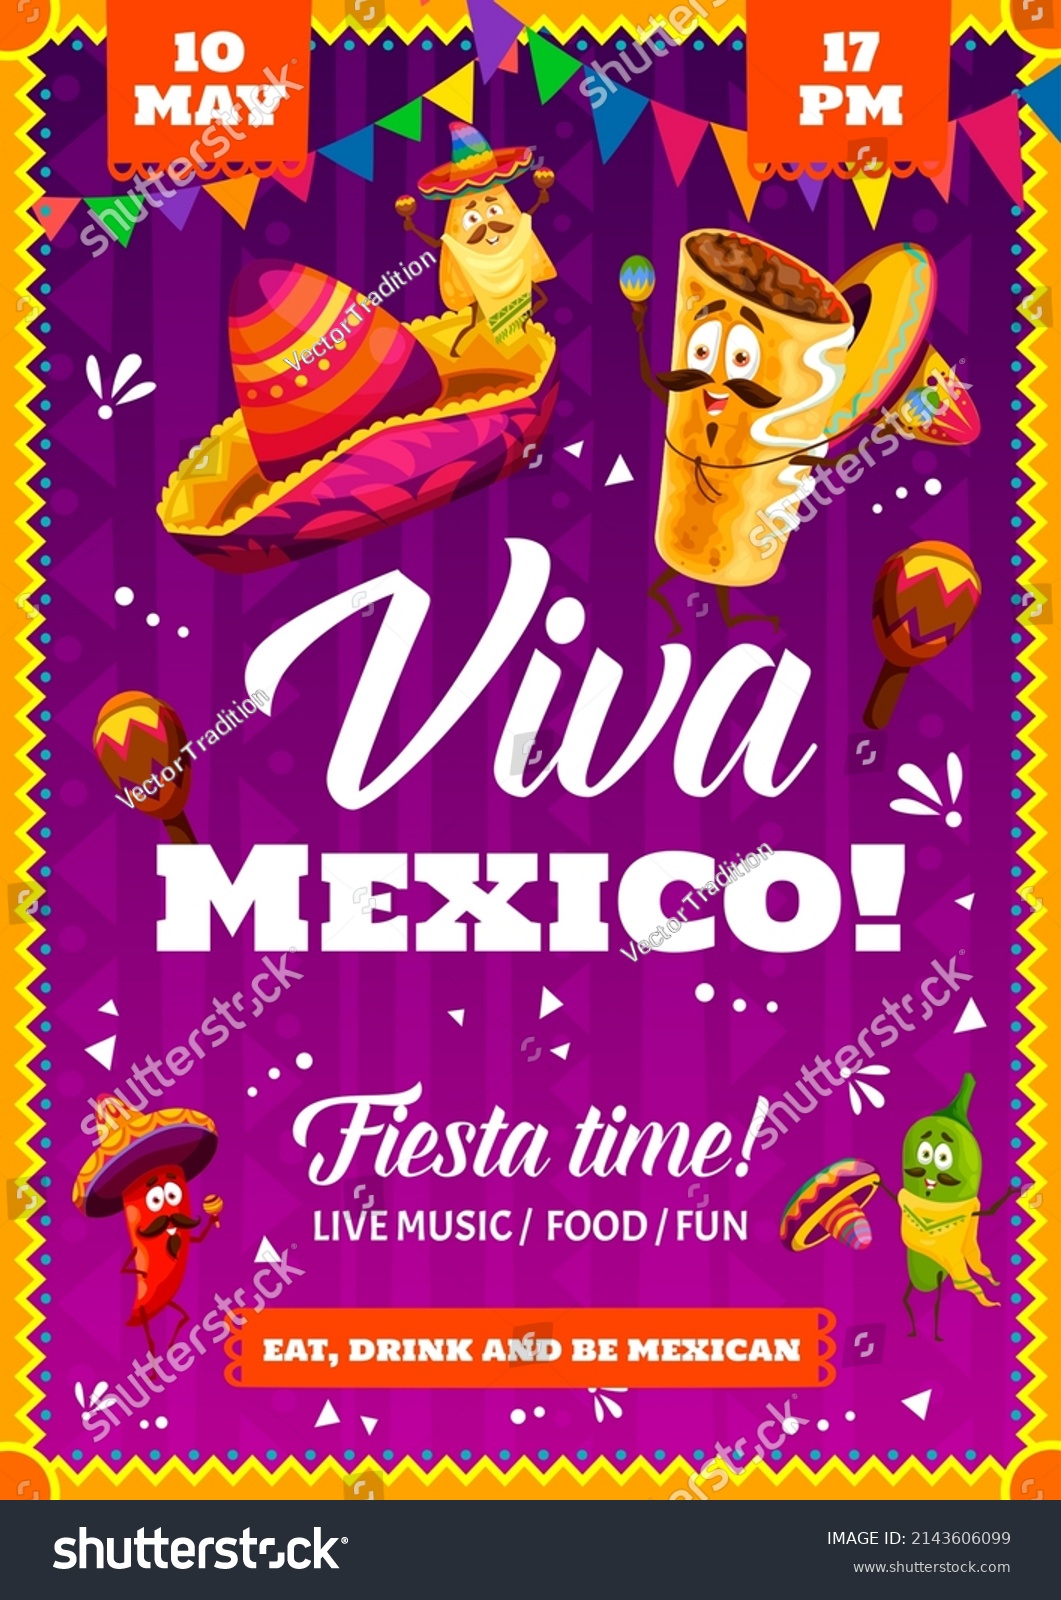 SVG of Mexican fiesta party flyer or poster with cartoon mexican jalapeno and chili peppers, chimichanga funny characters. Holiday celebration party with mexican traditional fast food, music and sombrero hat svg